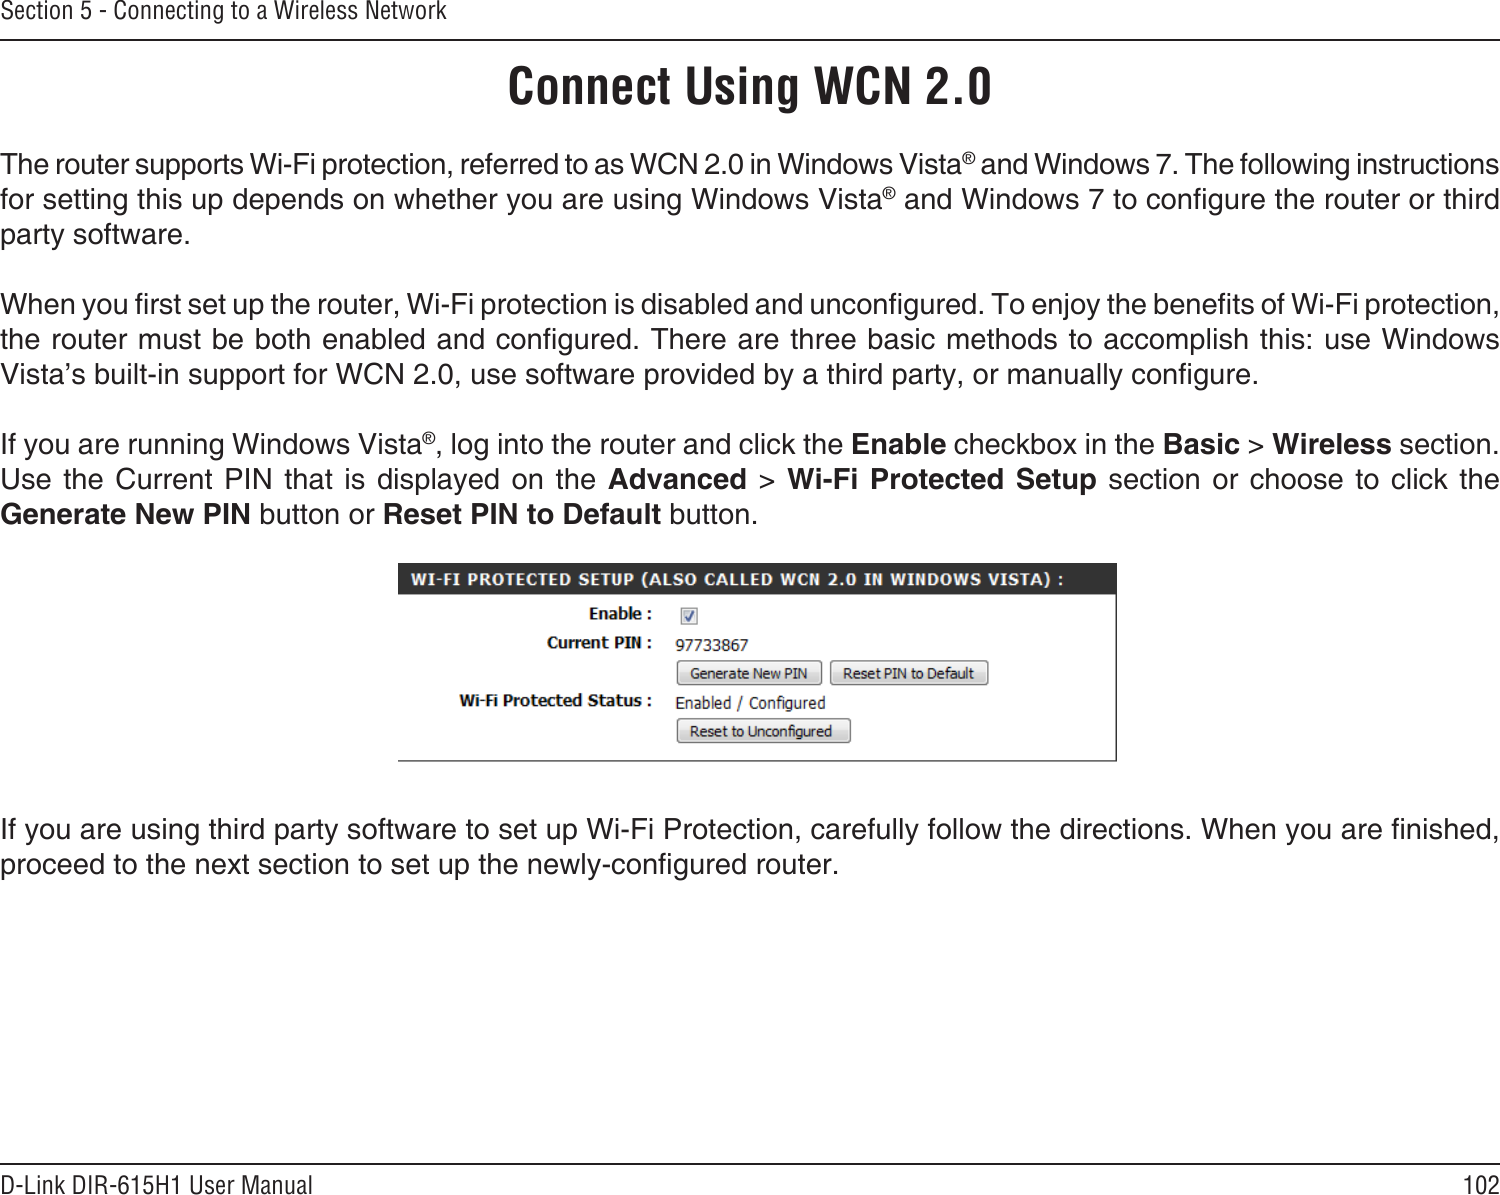 102D-Link DIR-615H1 User ManualSection 5 - Connecting to a Wireless NetworkConnect Using WCN 2.0The router supports Wi-Fi protection, referred to as WCN 2.0 in Windows Vista® and Windows 7. The following instructions for setting this up depends on whether you are using Windows Vista® and Windows 7 to congure the router or third party software.        When you rst set up the router, Wi-Fi protection is disabled and uncongured. To enjoy the benets of Wi-Fi protection, the router must be both enabled and congured. There are three basic methods to accomplish this: use Windows Vista’s built-in support for WCN 2.0, use software provided by a third party, or manually congure. If you are running Windows Vista®, log into the router and click the Enable checkbox in the Basic &gt; Wireless section. Use the Current  PIN  that  is displayed on  the  Advanced  &gt;  Wi-Fi Protected Setup  section  or  choose to click  the Generate New PIN button or Reset PIN to Default button. If you are using third party software to set up Wi-Fi Protection, carefully follow the directions. When you are nished, proceed to the next section to set up the newly-congured router. 